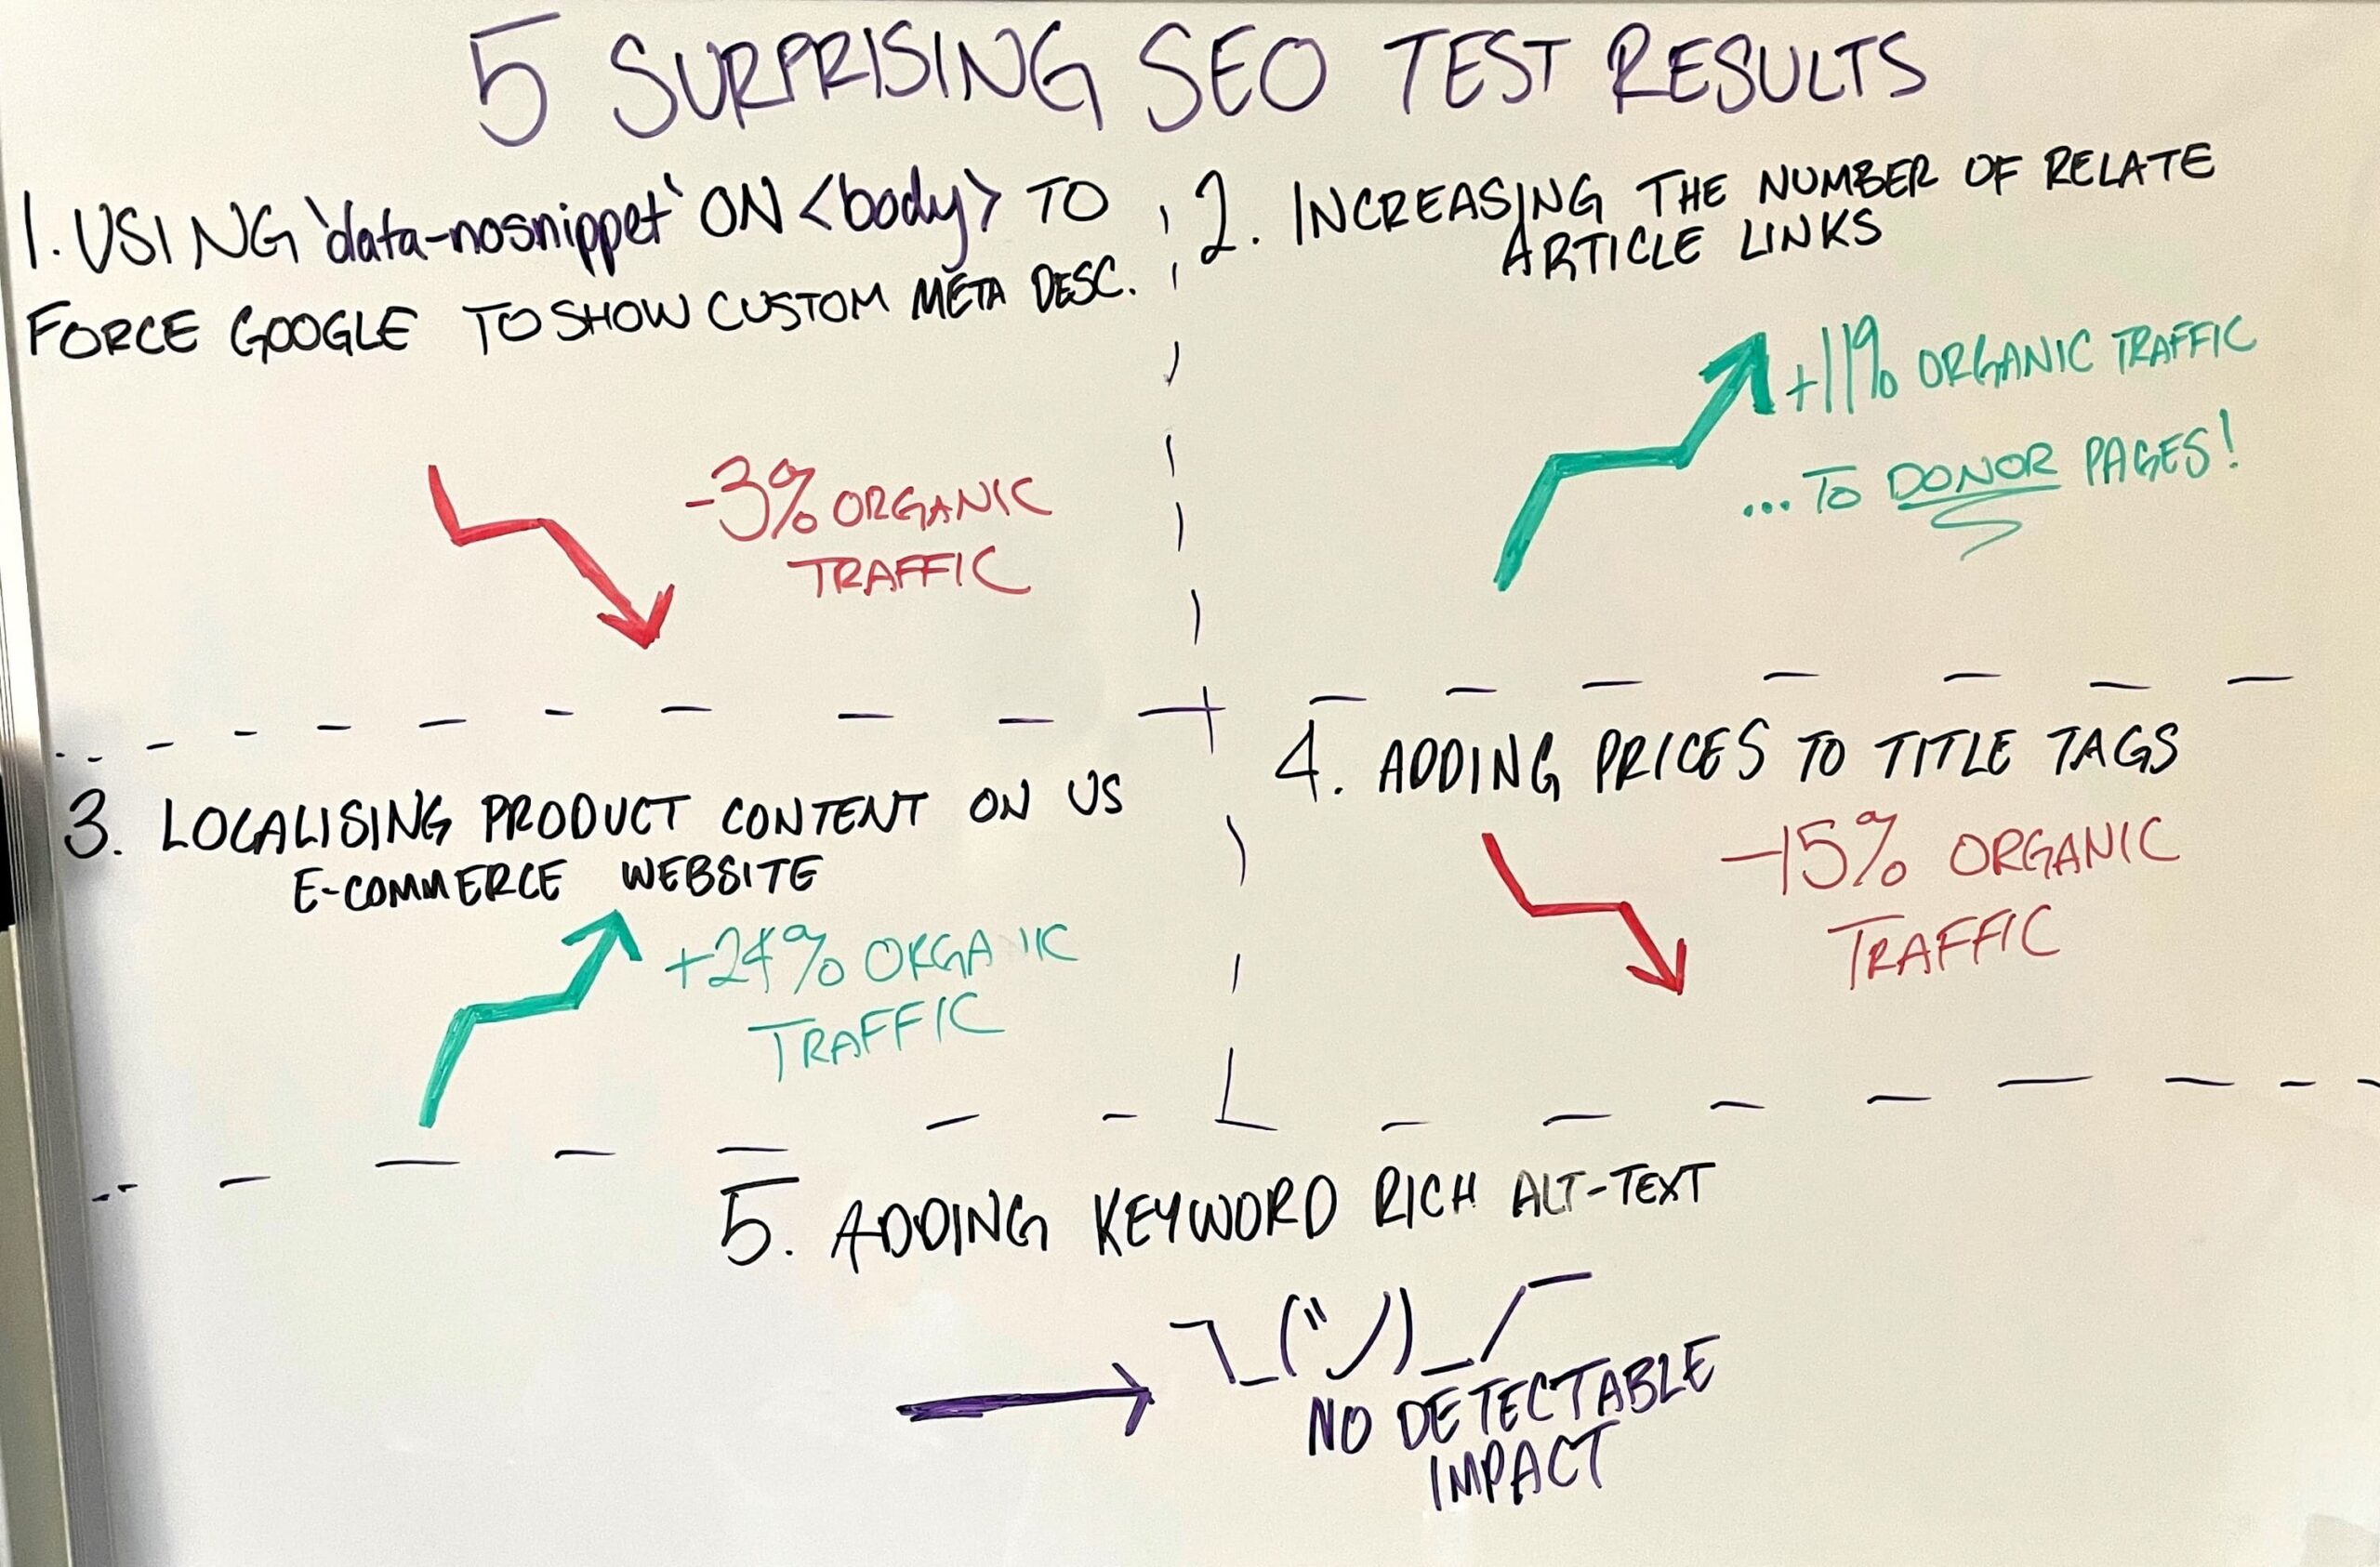 whiteboard outlining five surprising test results Emily got during SEO tests